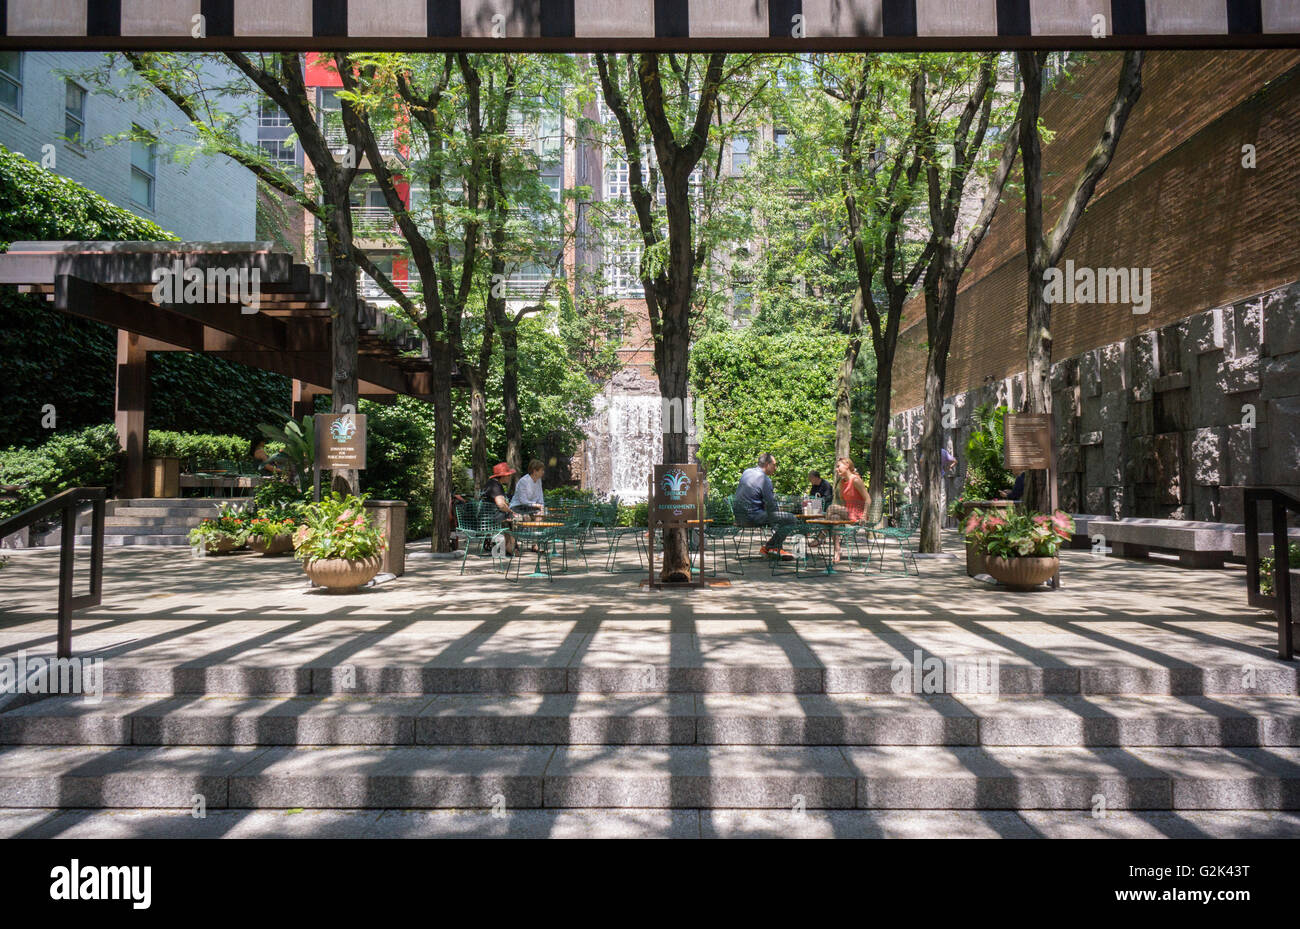 Greenacre Park, a vest pocket park on East 51 St. in Midtown in New York on Saturday, May 28, 2016. The small park is a privately owned public space (POPS). (© Richard B. Levine) Stock Photo